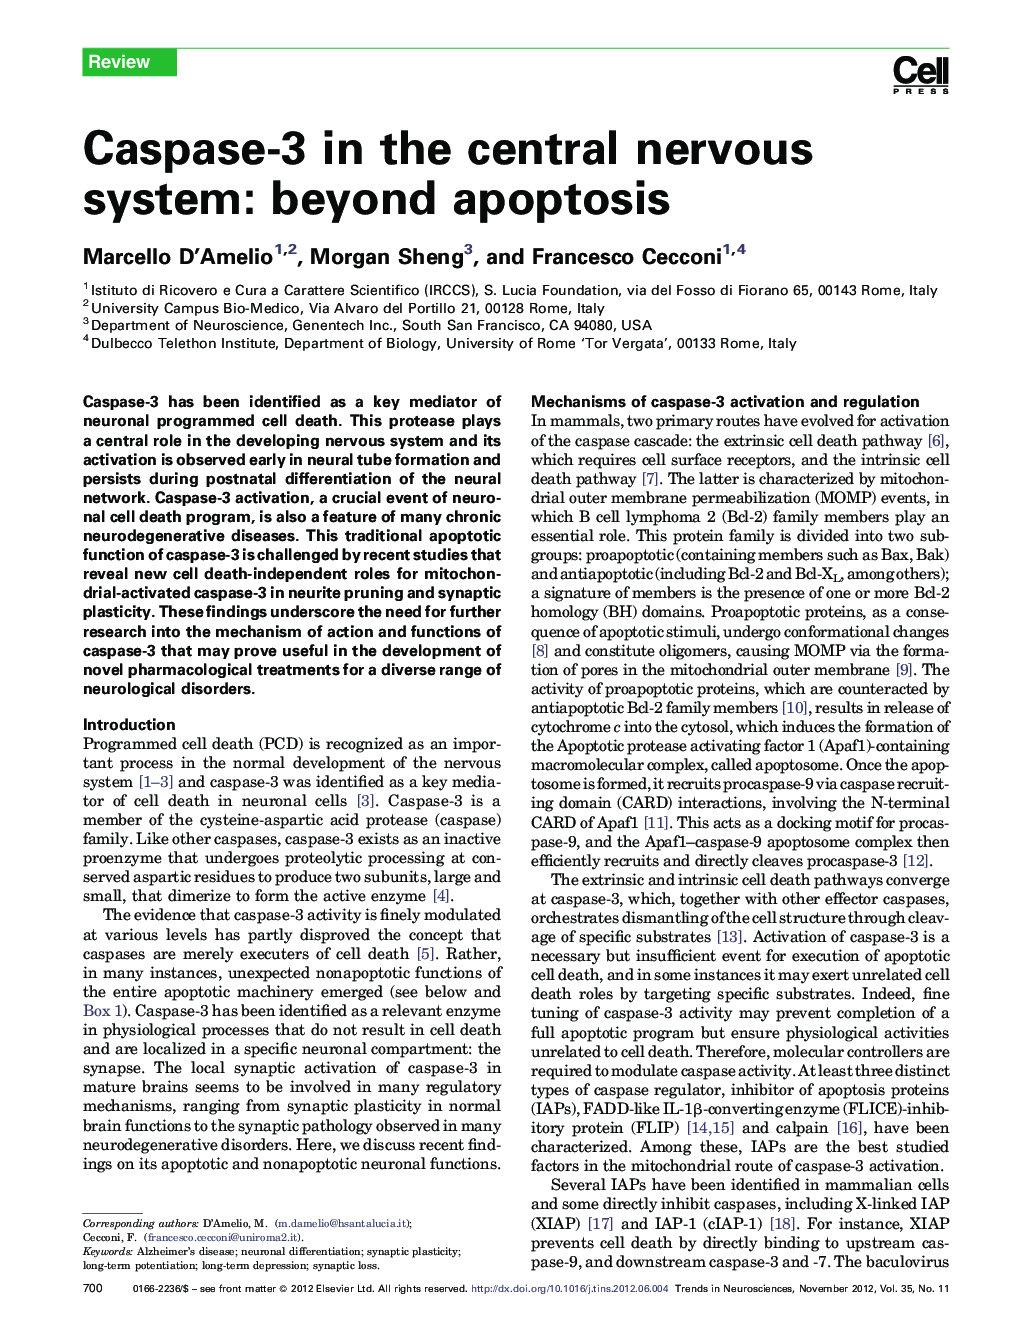 Caspase-3 in the central nervous system: beyond apoptosis